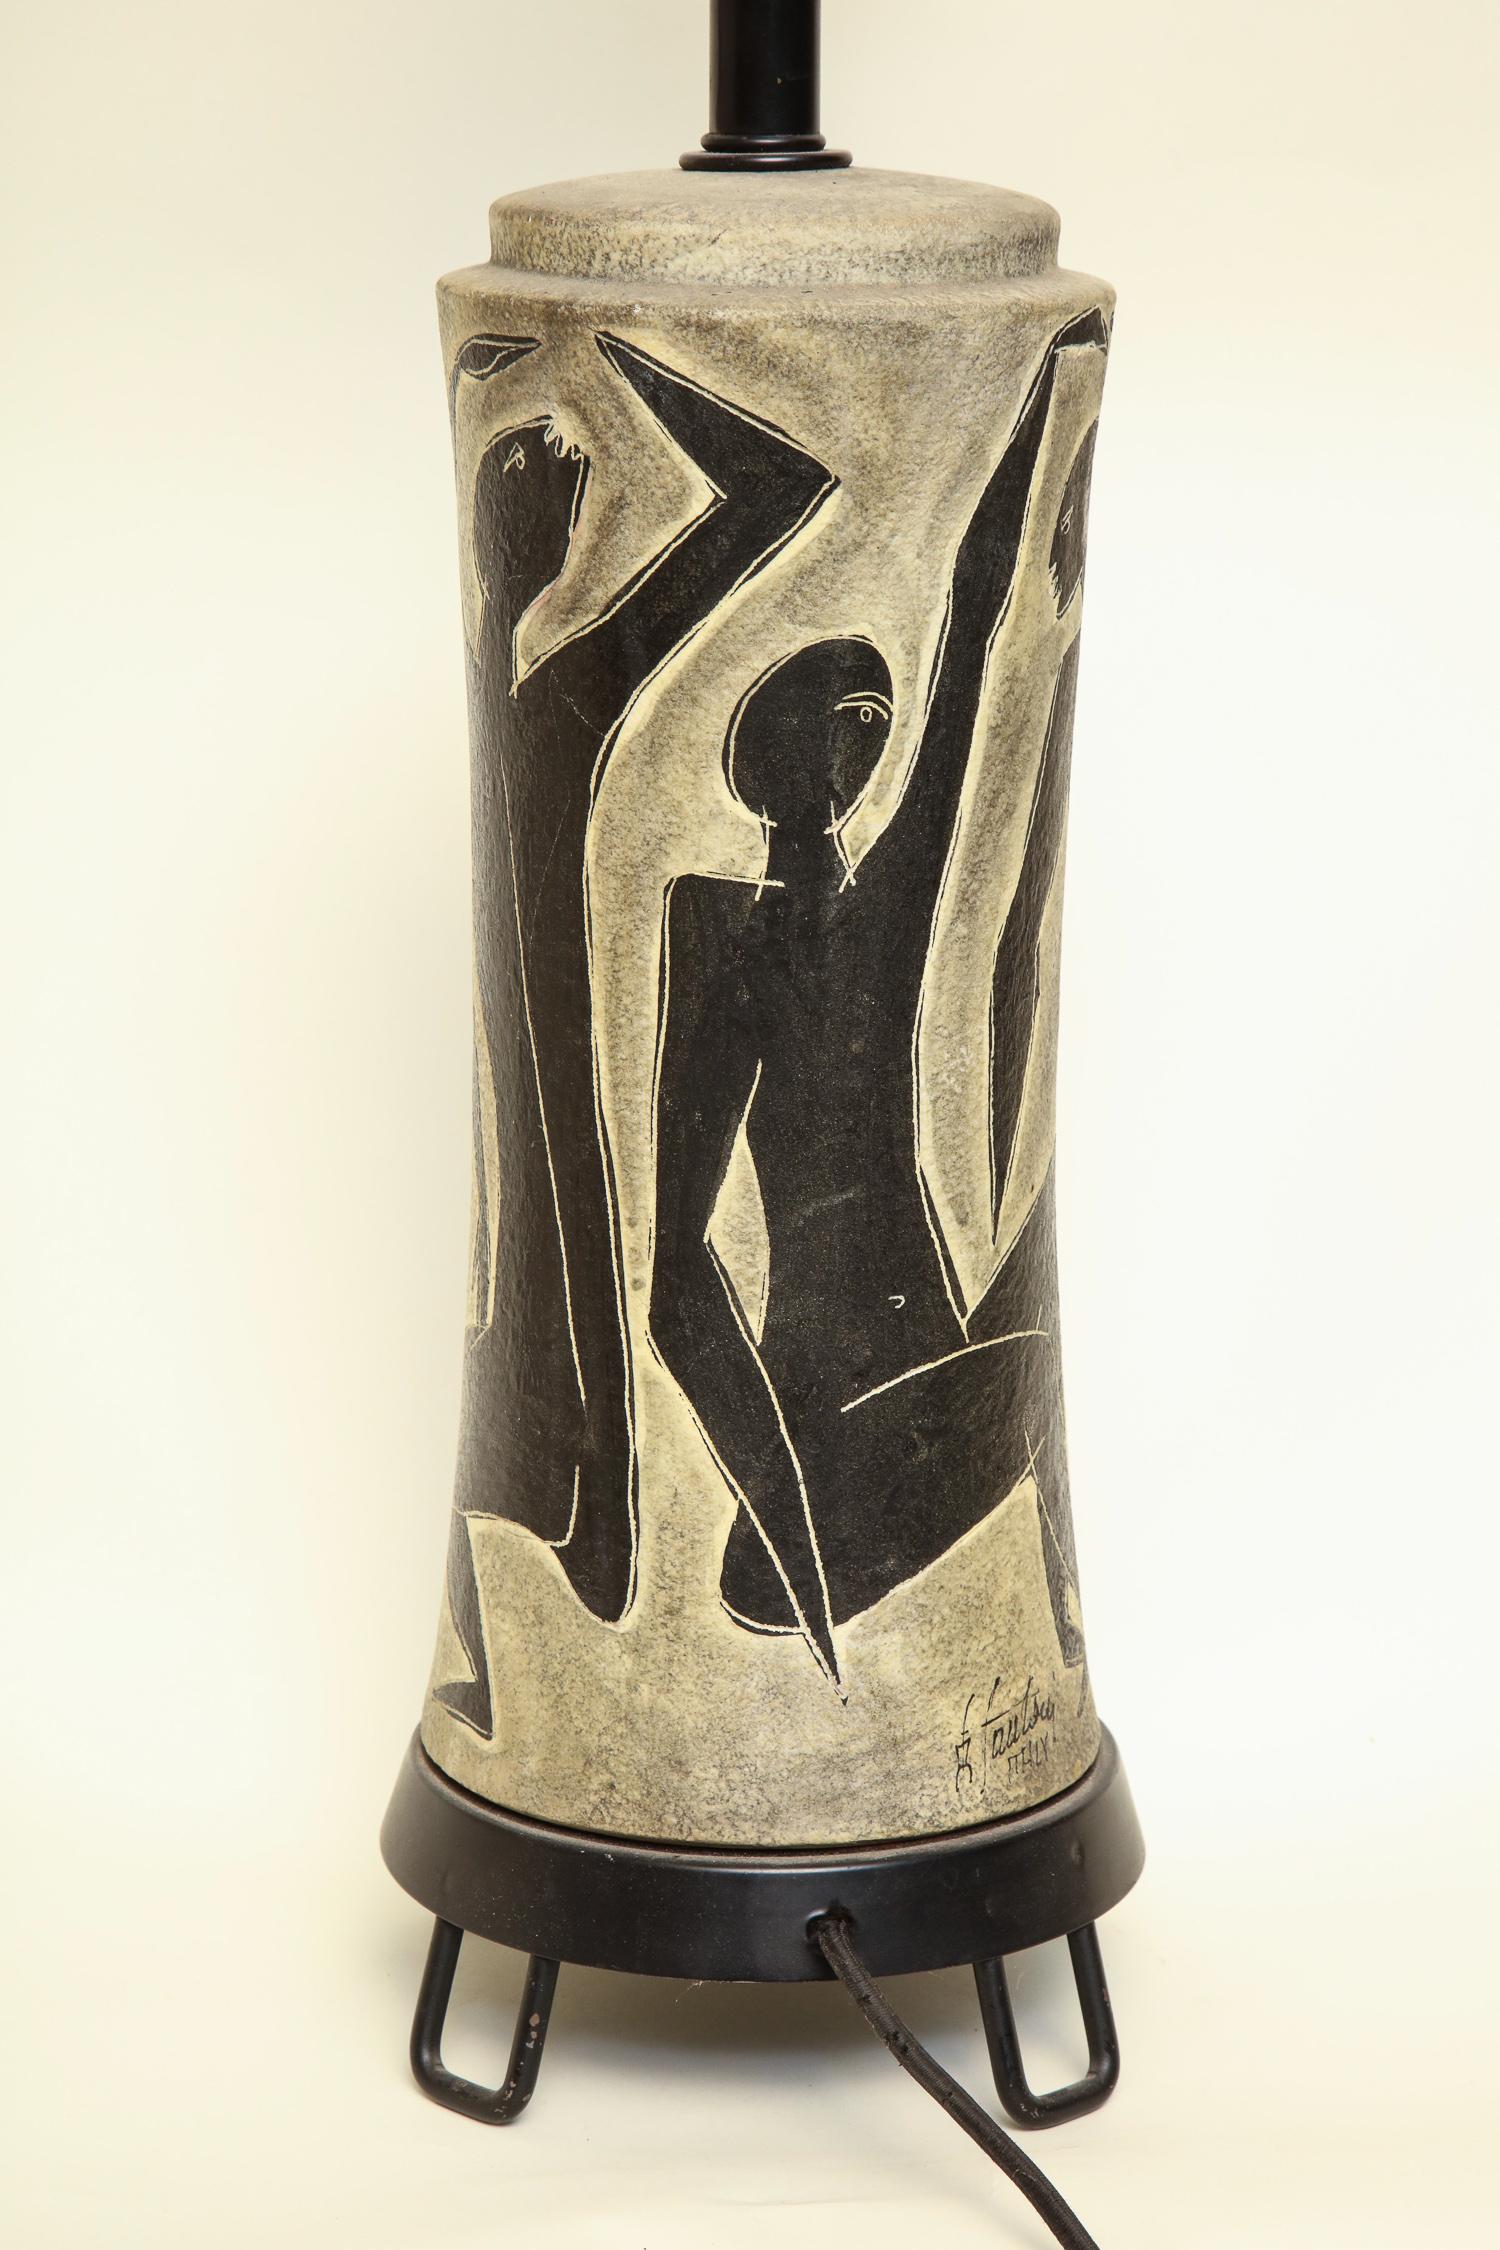 Fantoni Table Lamp Ceramic with Incised Stylized Men, Mid-Century Modern, 1950s For Sale 4